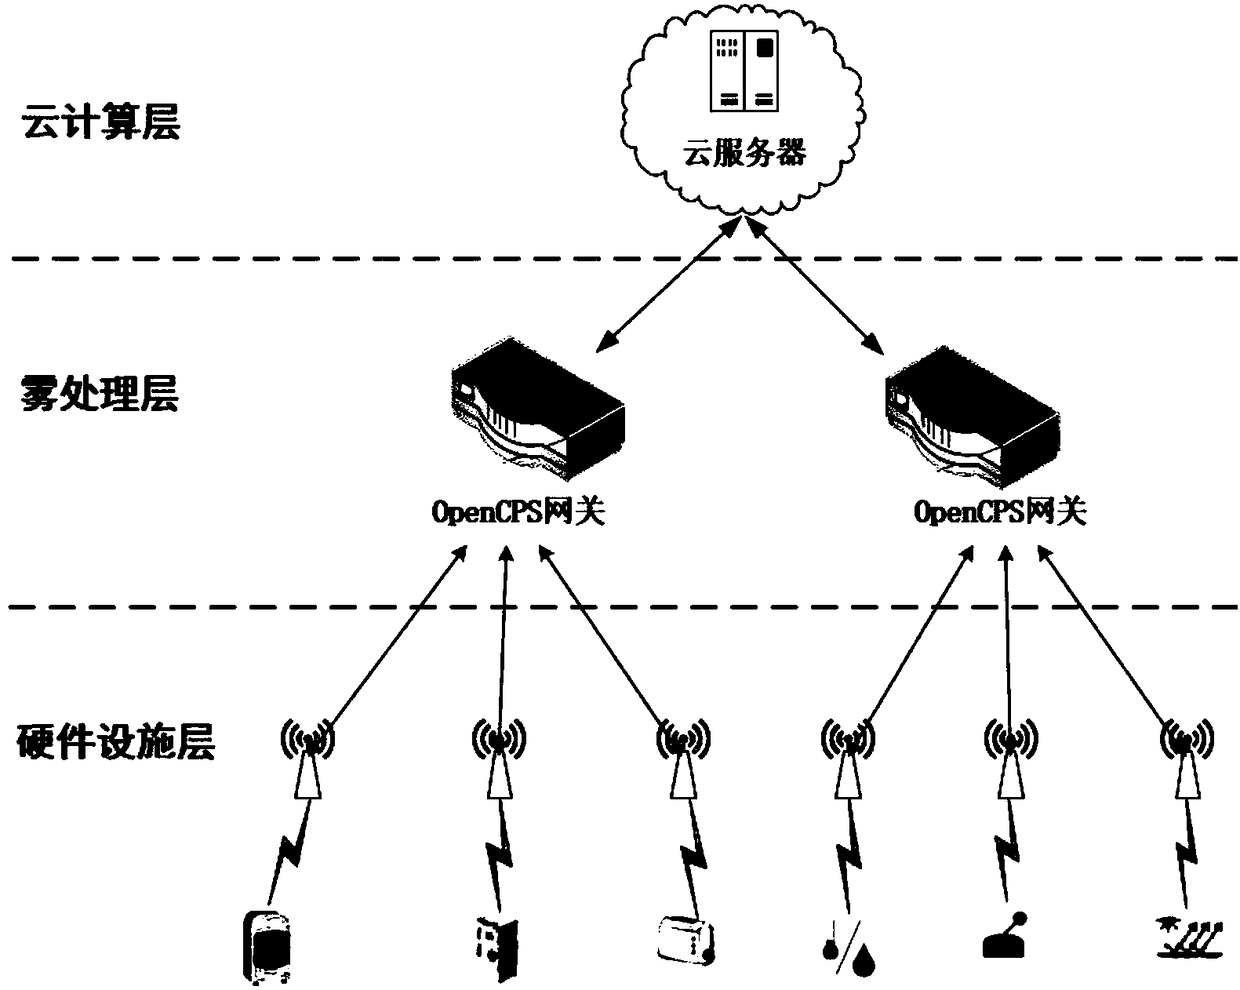 Cloud-mist combined internet of things application construction system based on SDN